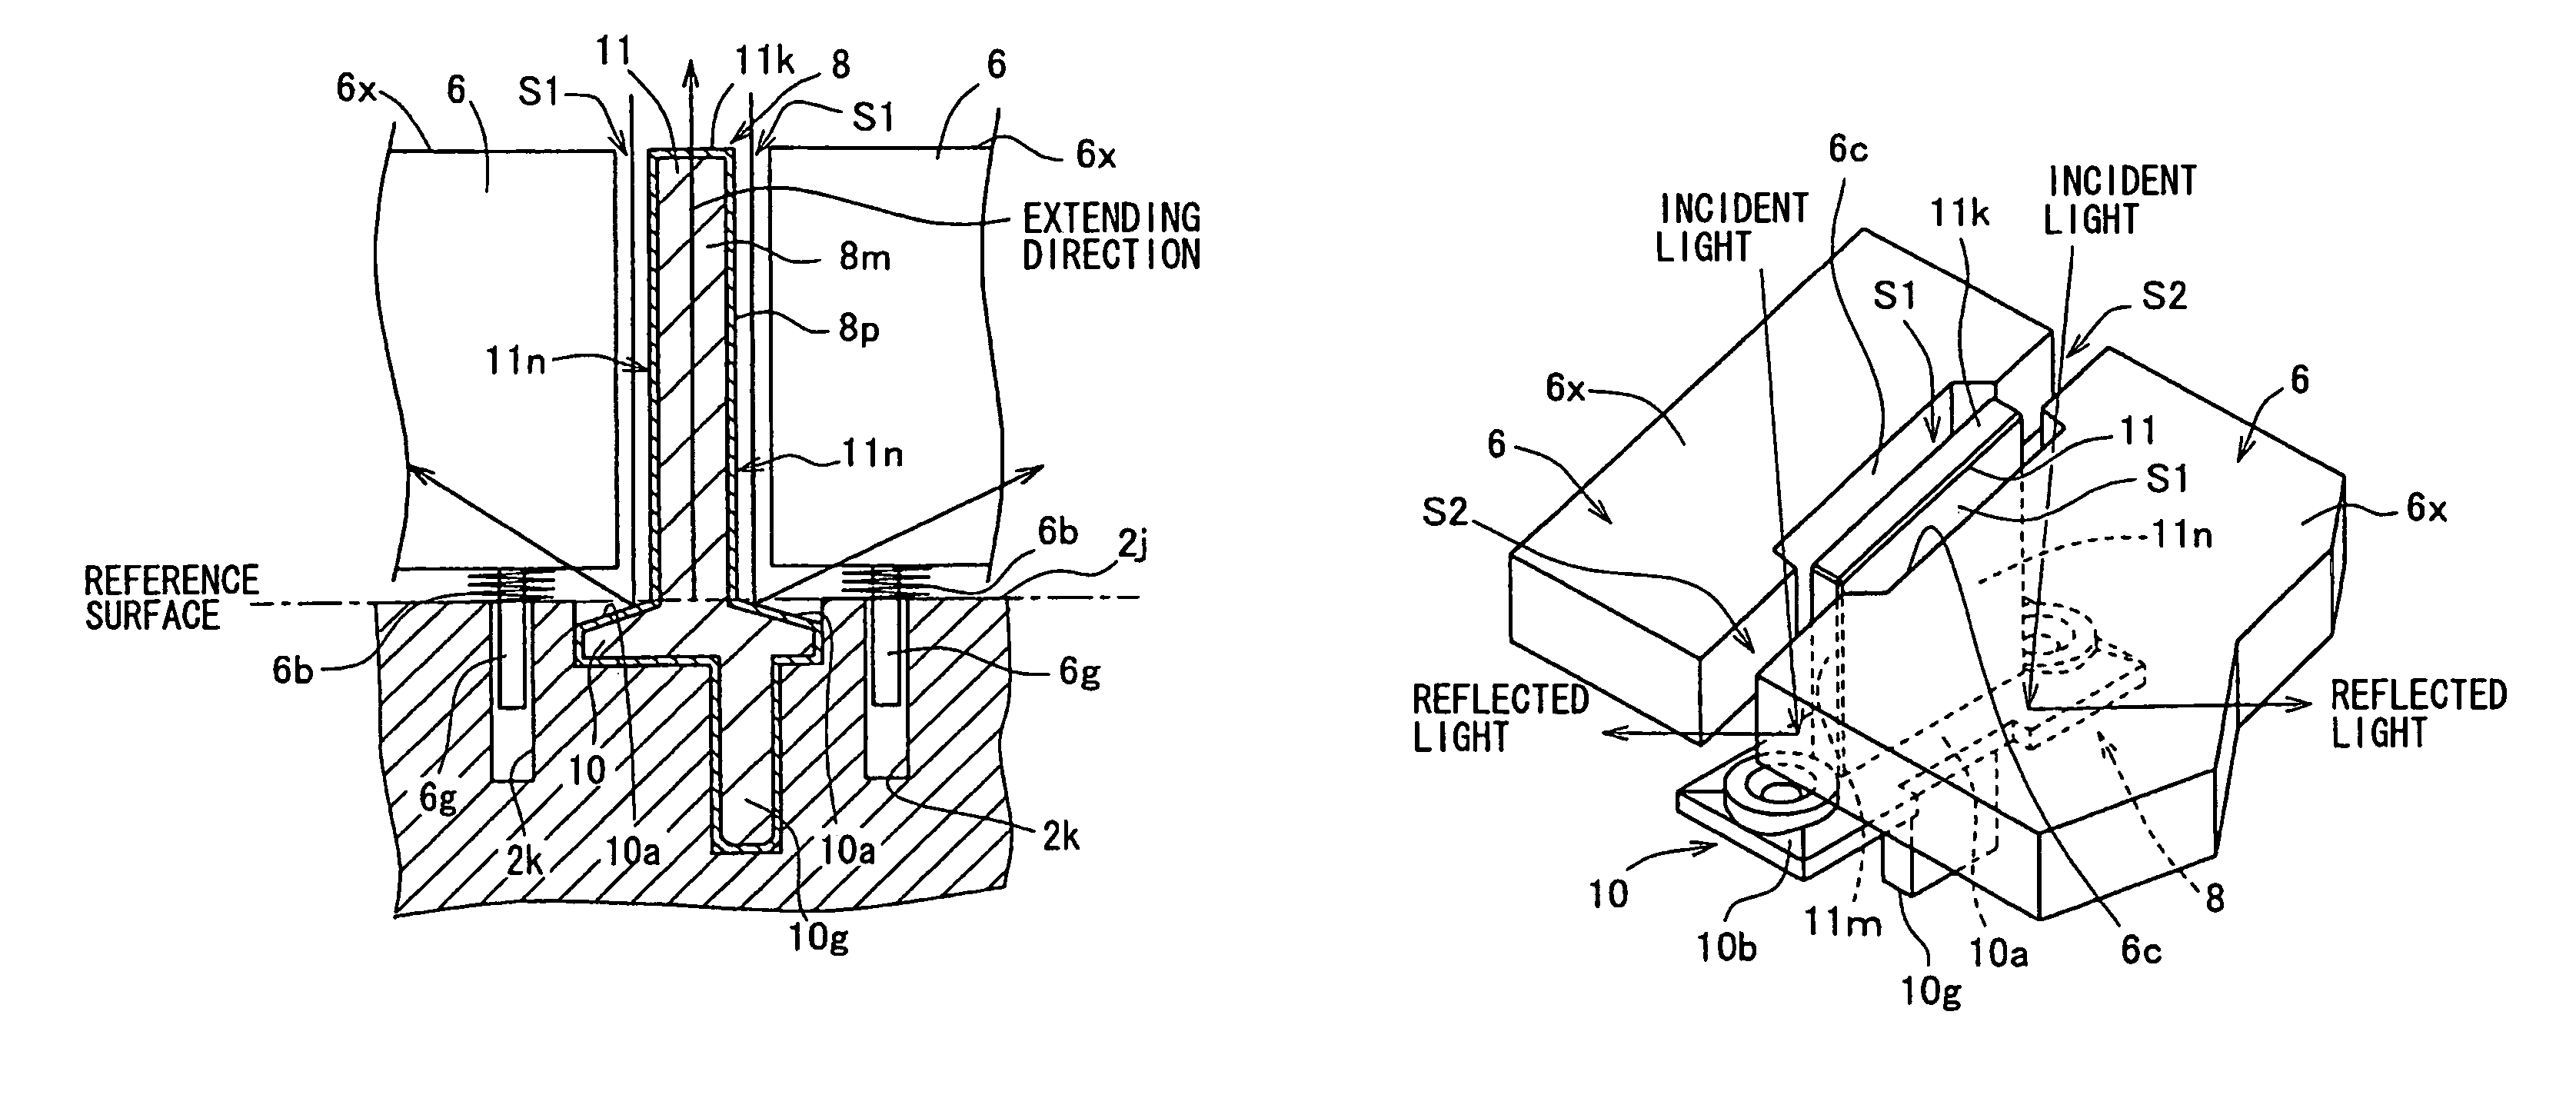 Operating switch unit for use in automotive vehicle